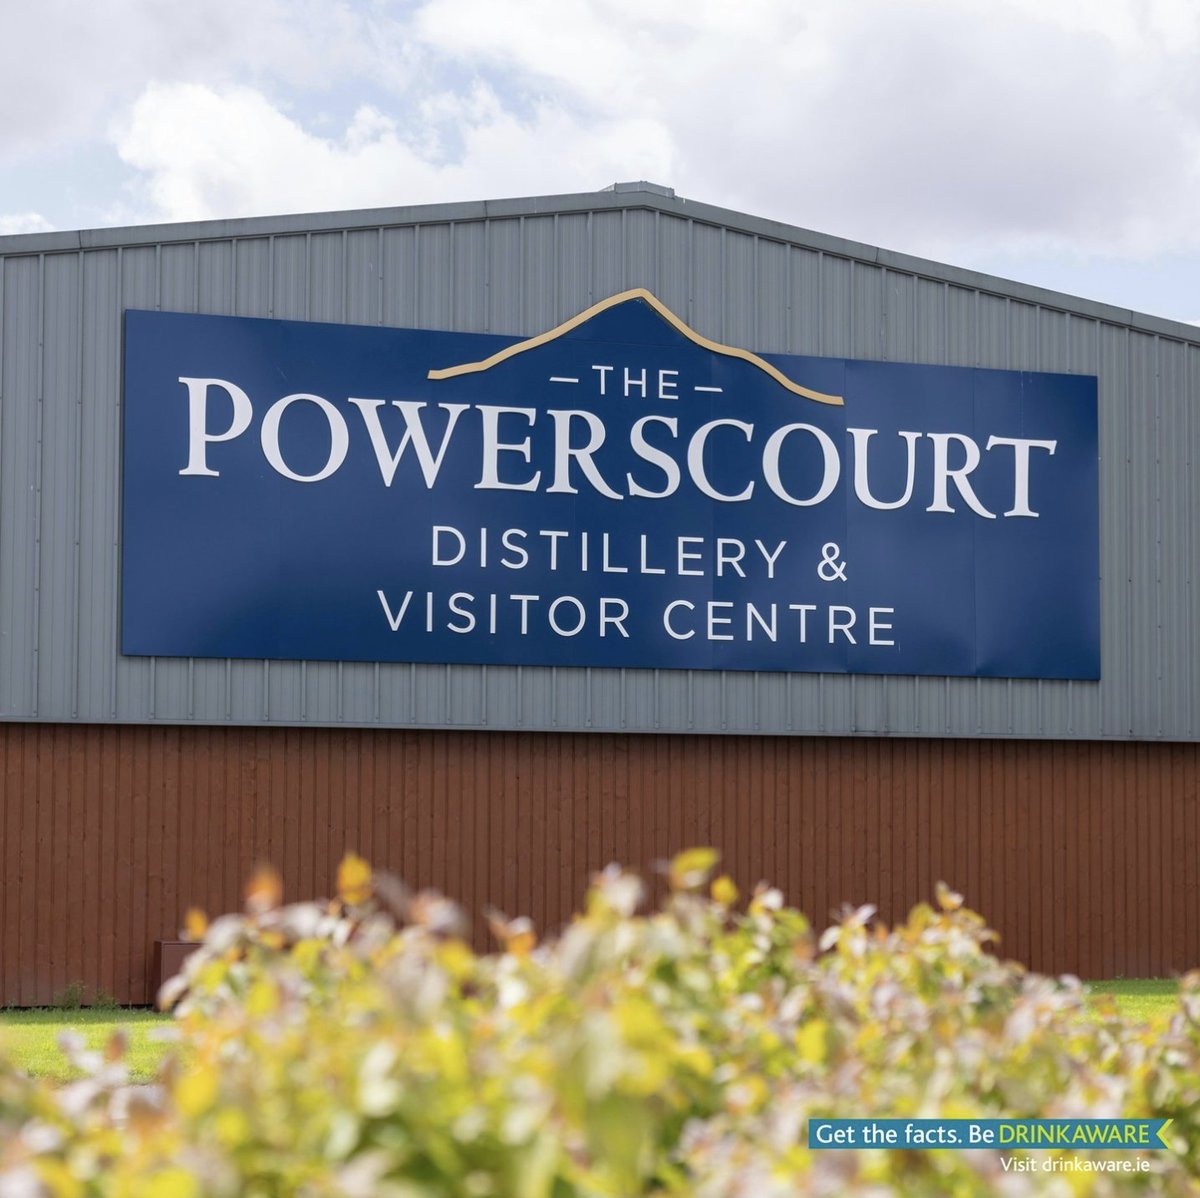 🎉 Our Brand Home @PowerscourtDist is turning 5 this week!🥳

Celebrate with us and share in the excitement! What whiskey release are you most looking forward to seeing from us next? 🥃

Let us know in the comments!

#PowerscourtDistillery #FercullenWhiskey #FercullenIrishWhiskey